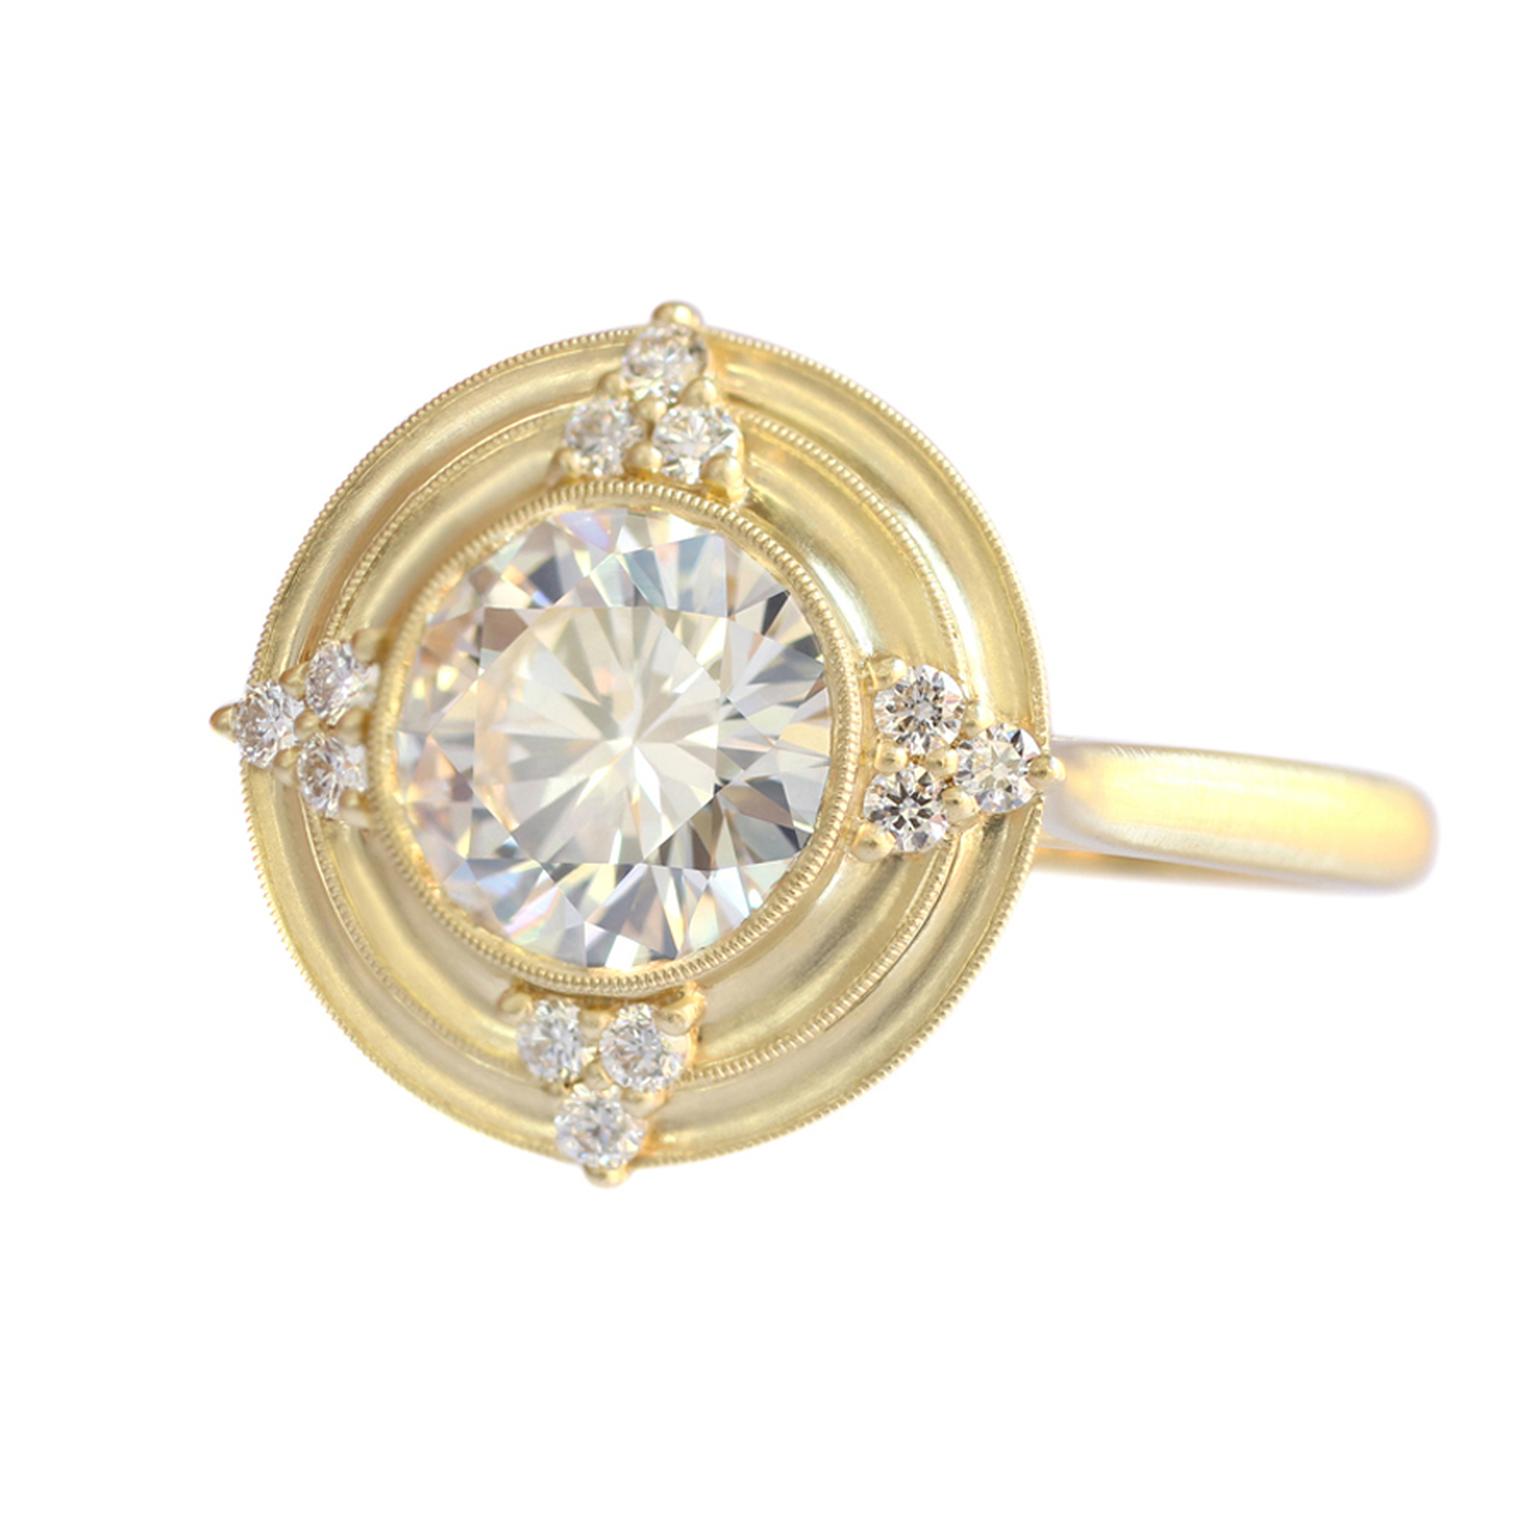 Erika Winters Thea halo vintage-style engagement ring